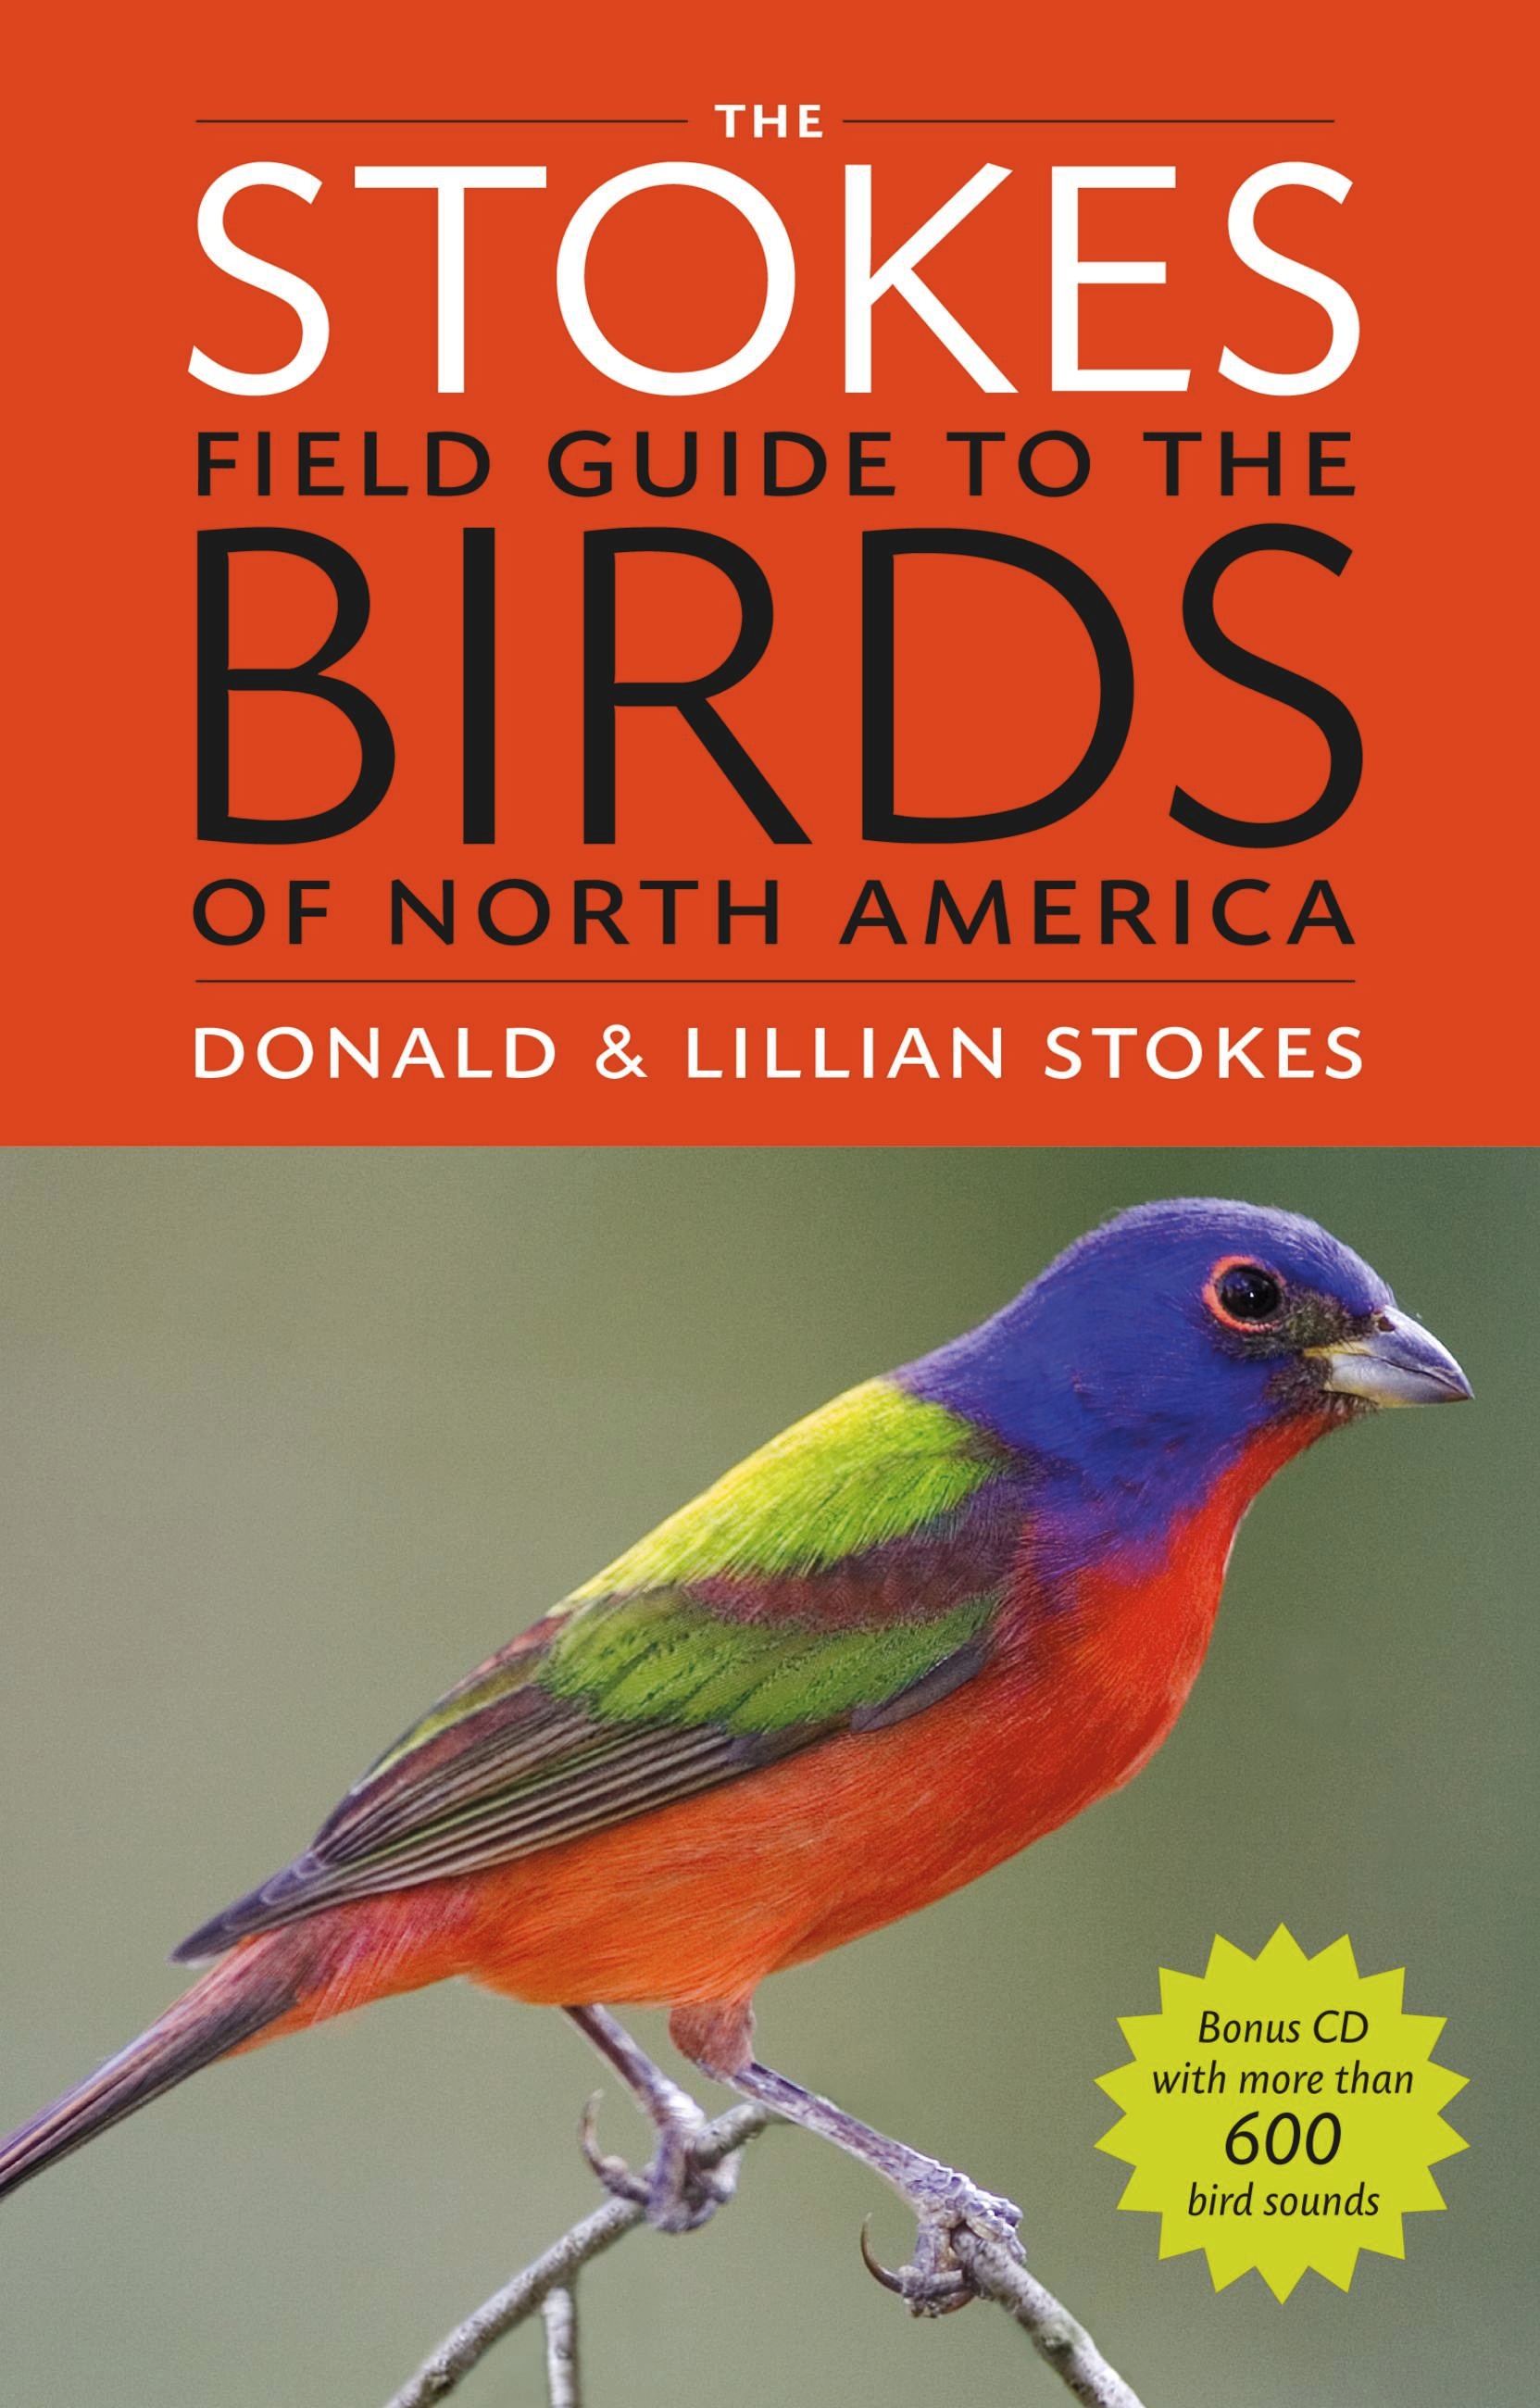 The Stokes Field Guide to the Birds of North America by Donald Stokes